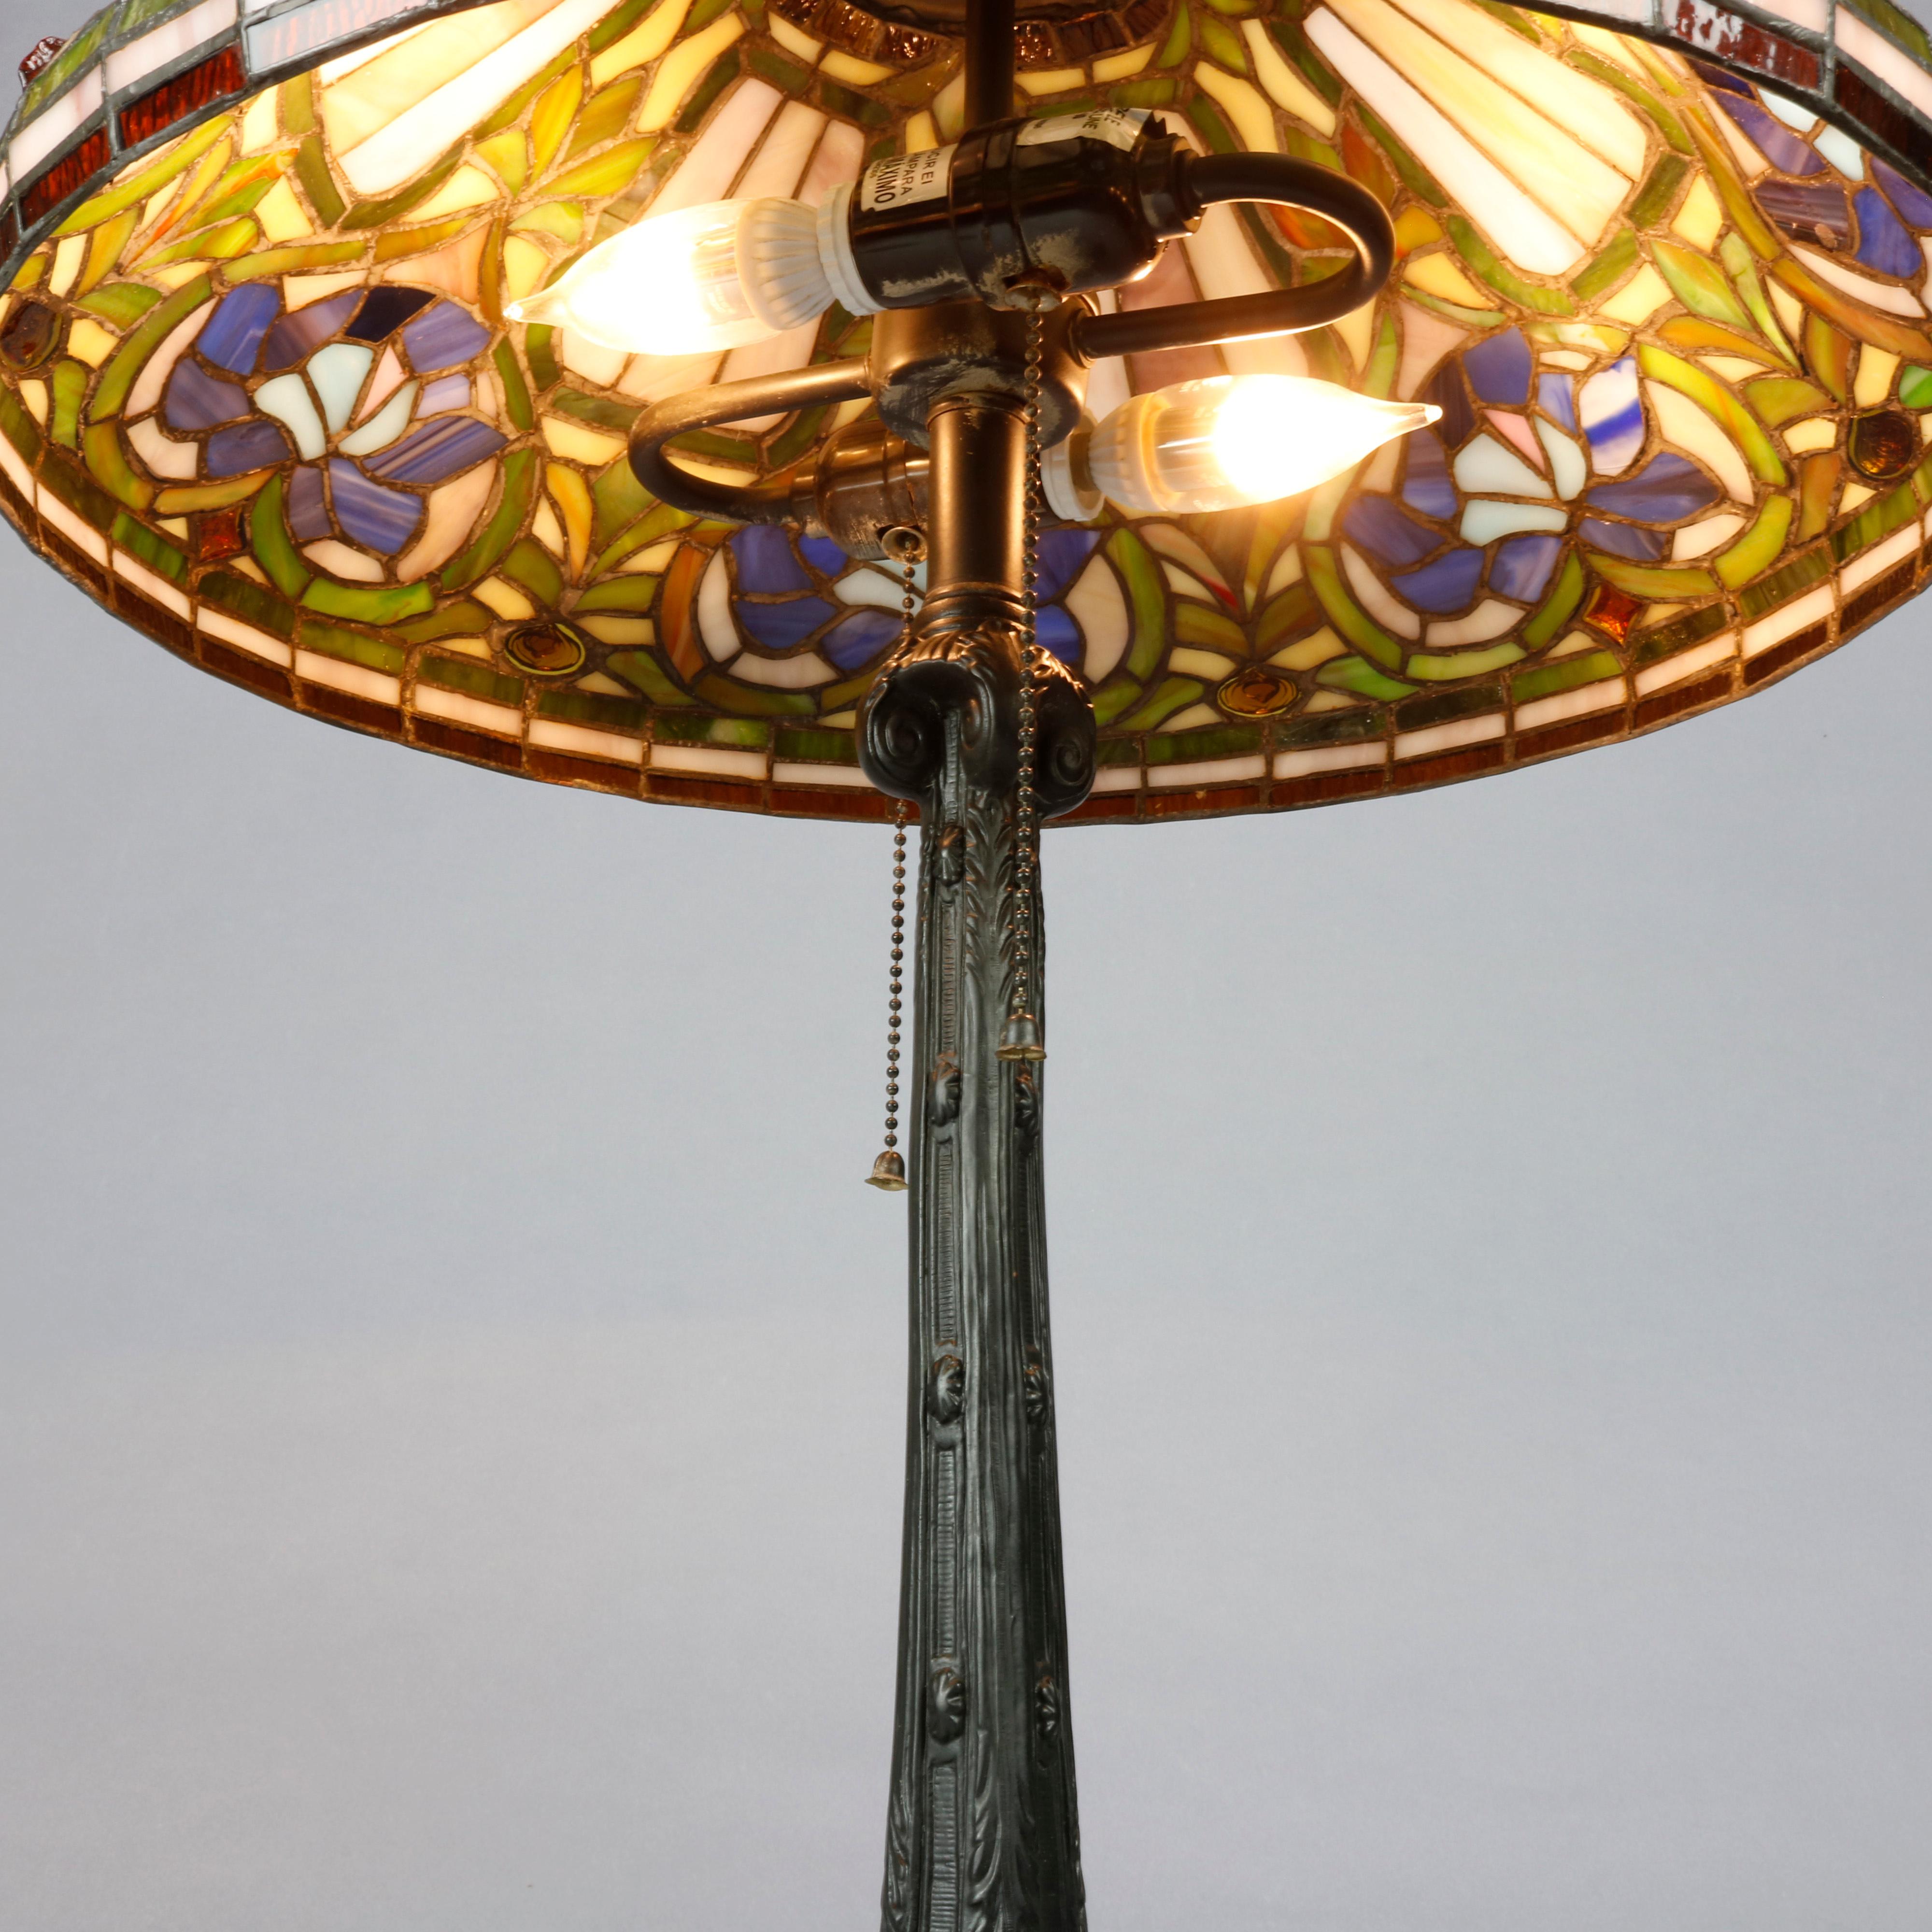 Antique Arts & Crafts Stylized Floral Slag, Stained and Jewel Glass Lamp 1